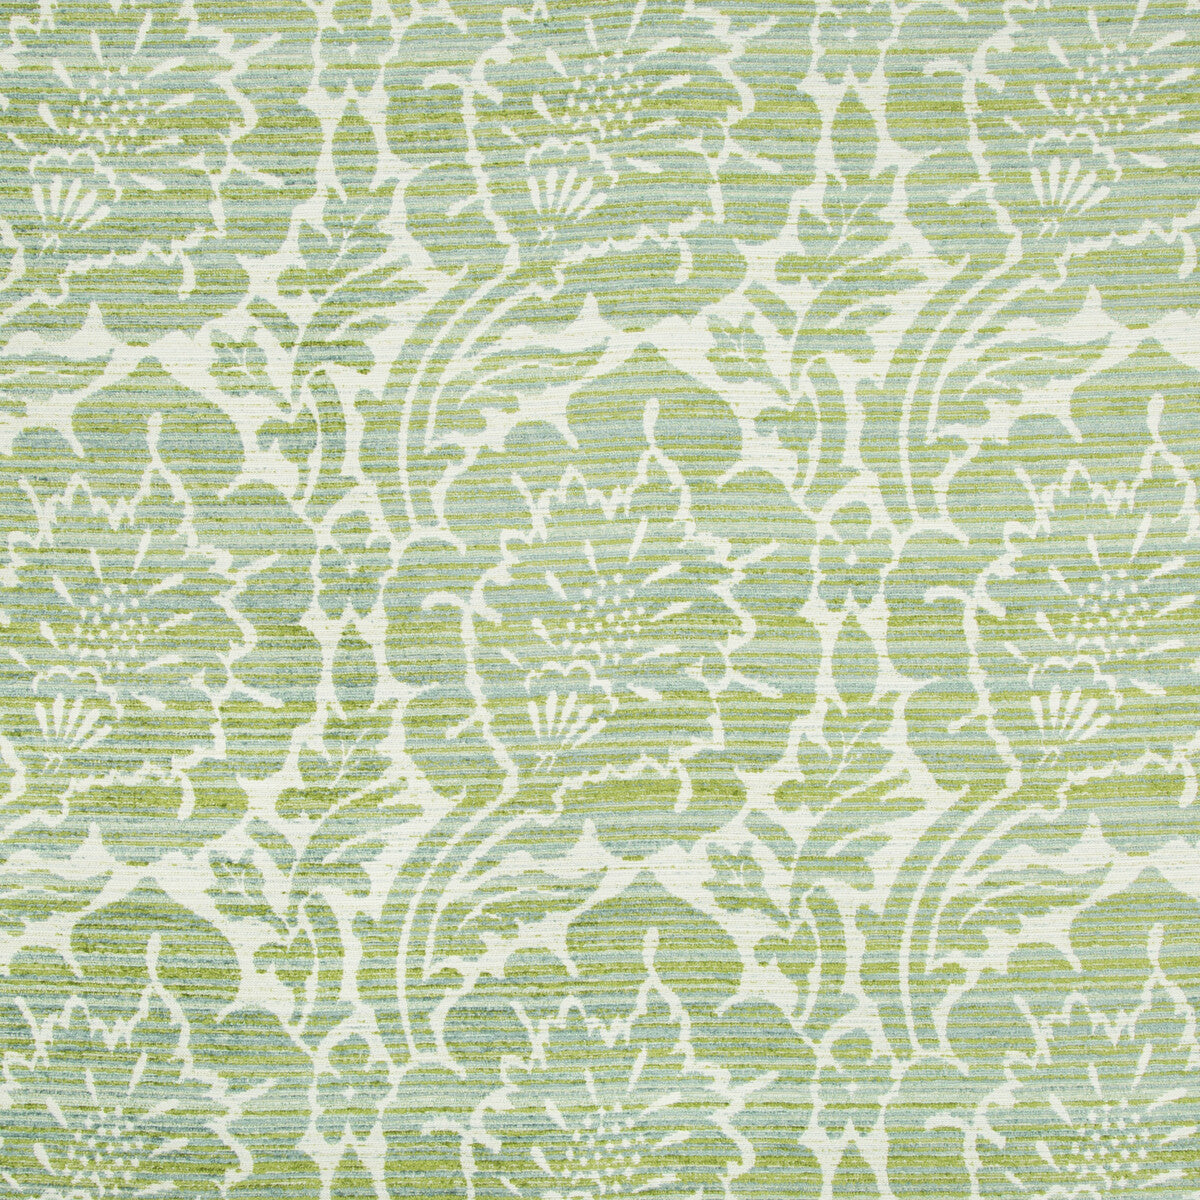 Kravet Contract fabric in 34772-23 color - pattern 34772.23.0 - by Kravet Contract in the Crypton Incase collection